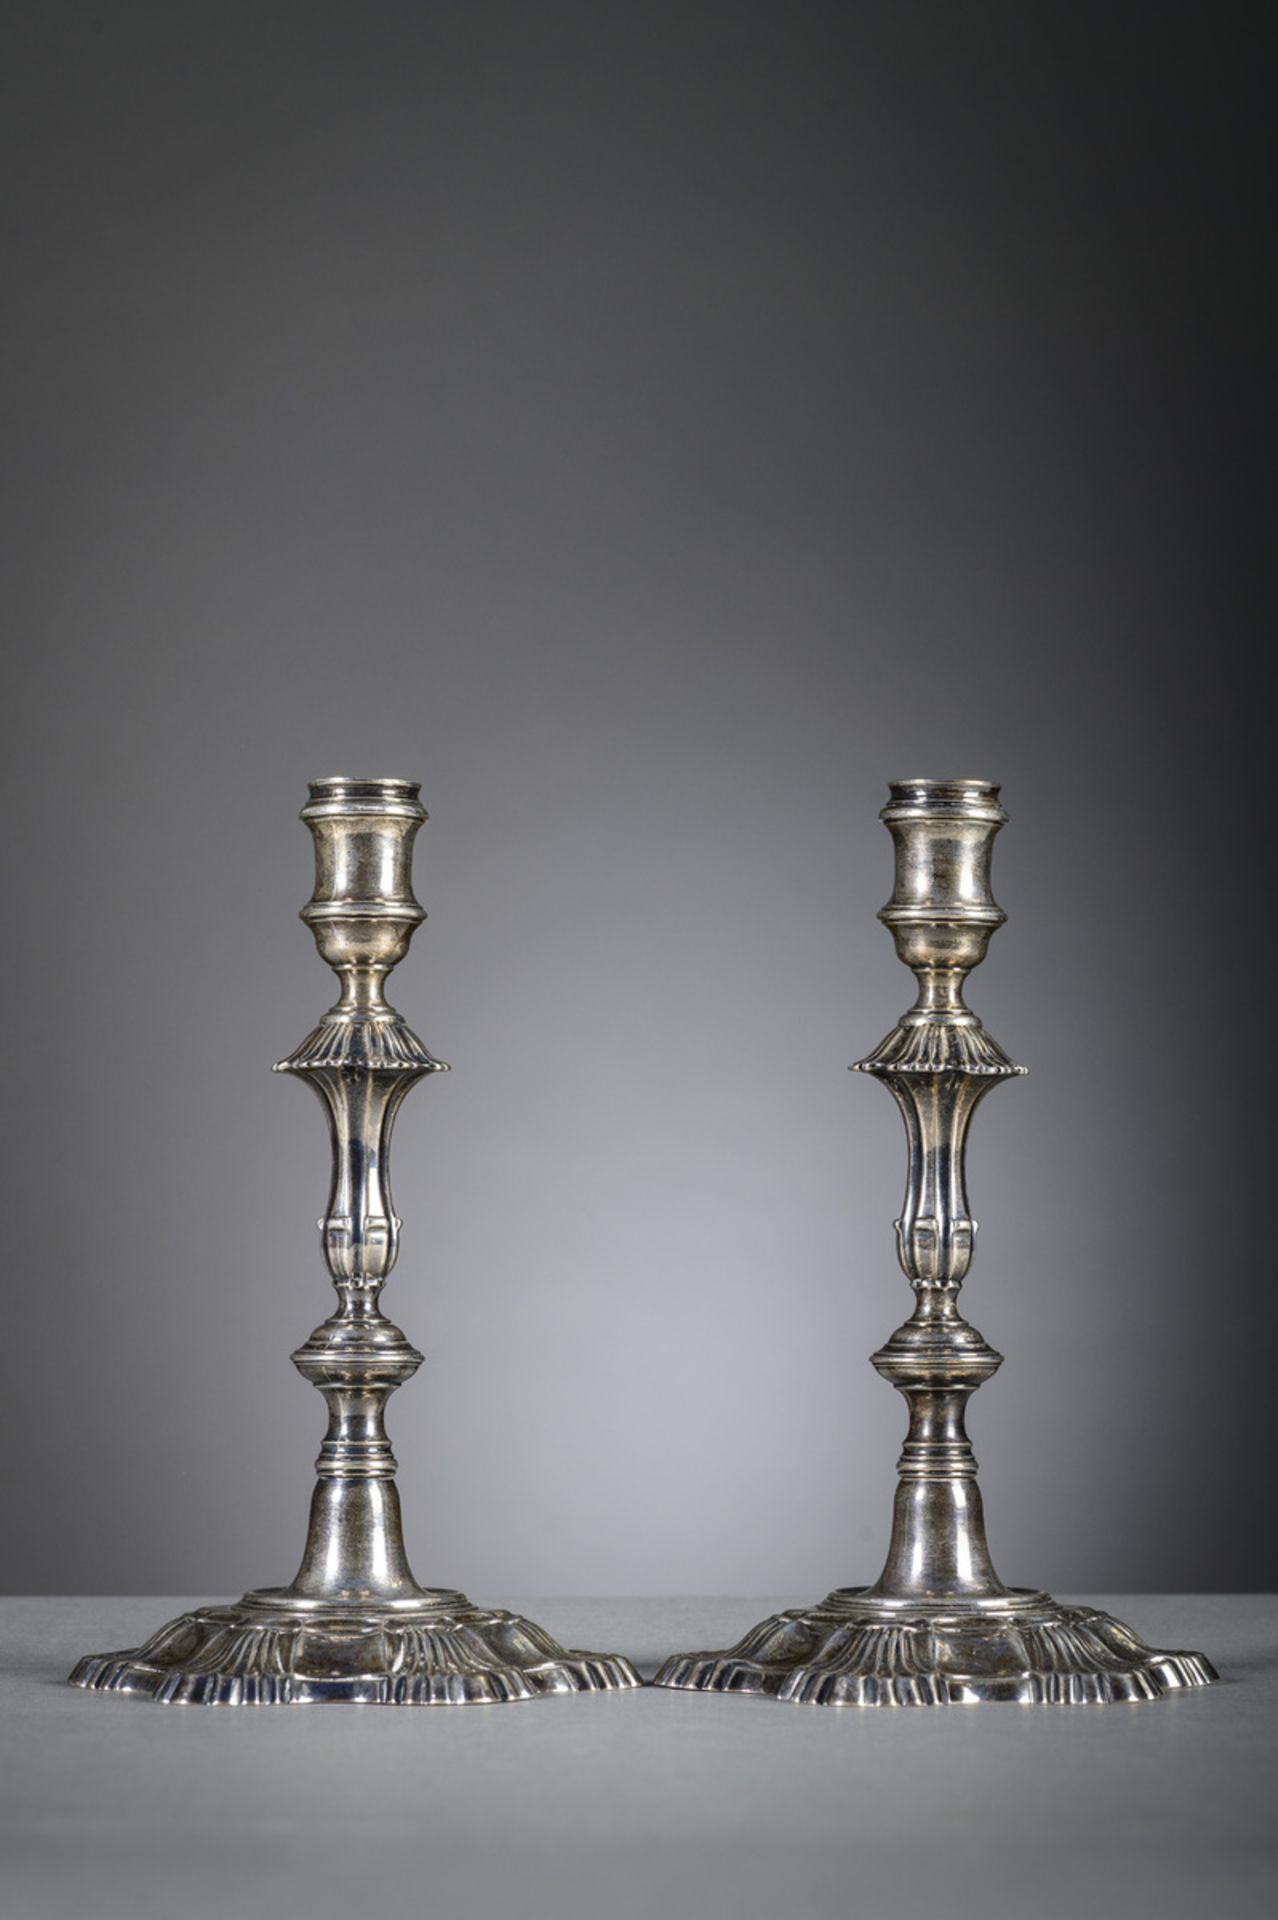 A pair of English silver candlesticks by Lampfert London, 18th century (h22cm) - Image 3 of 5